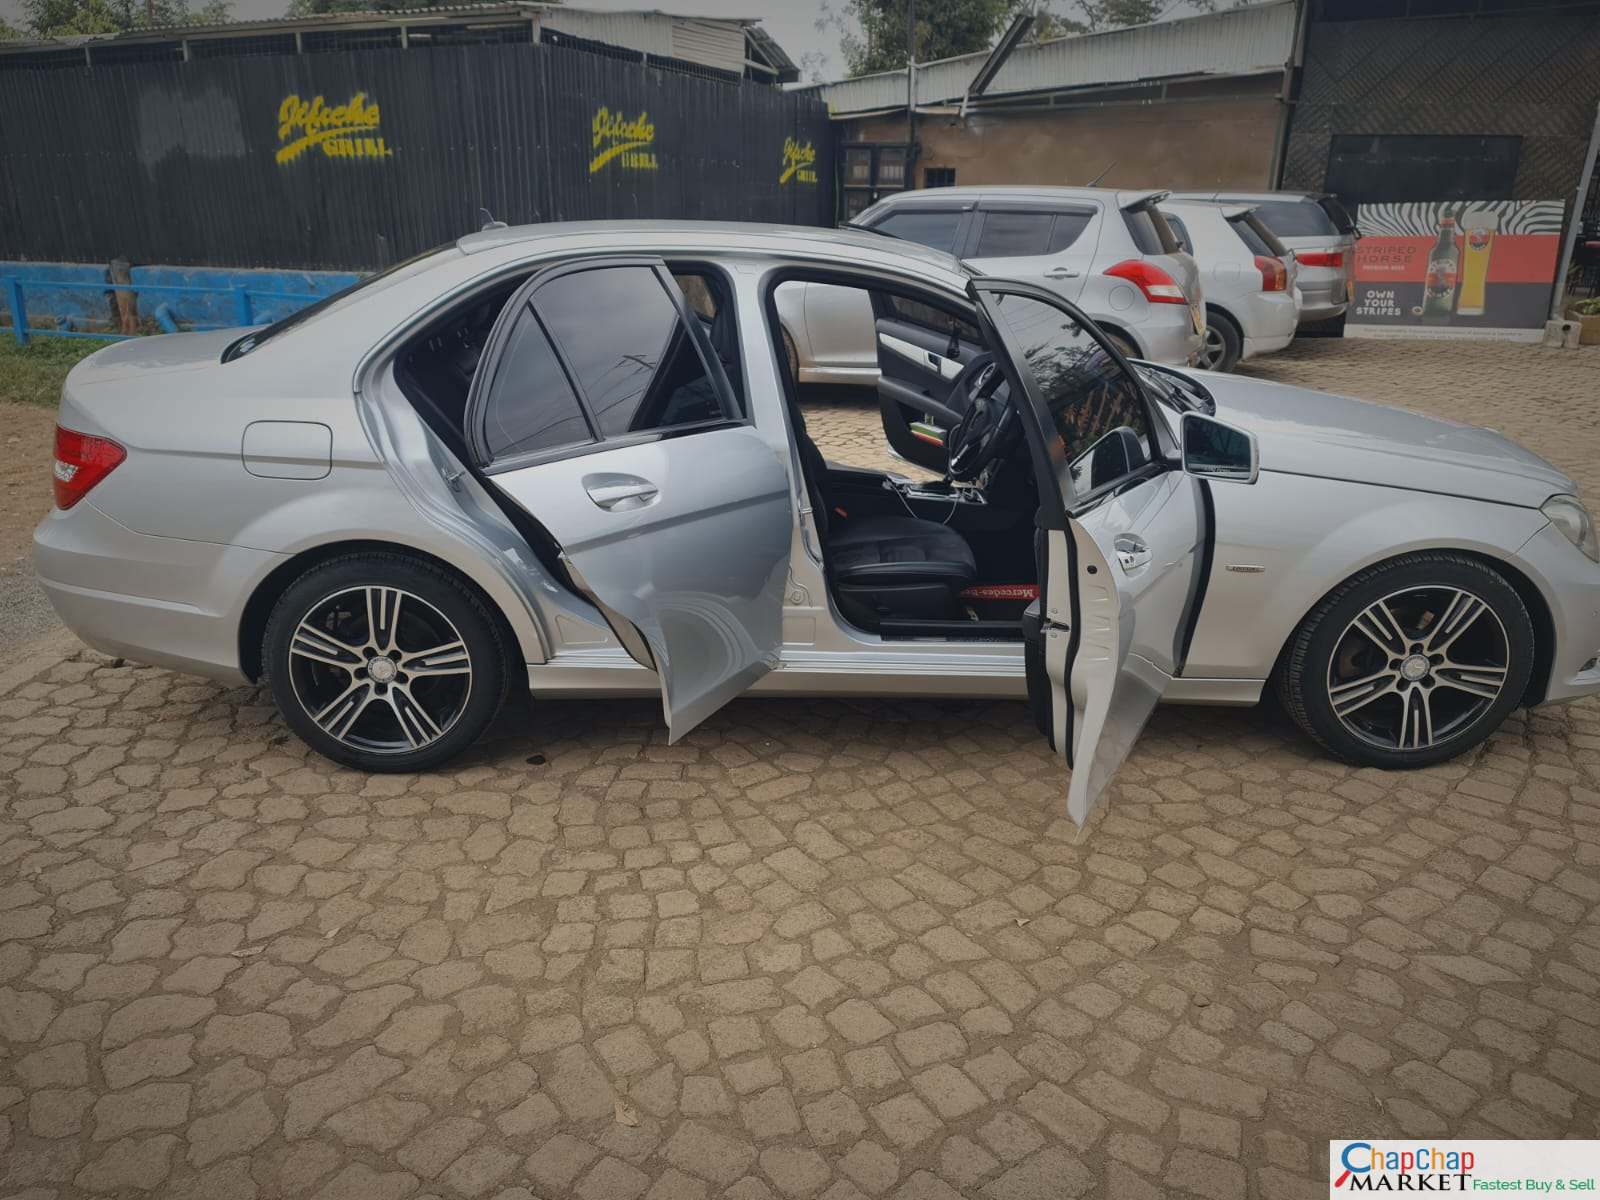 Cars Cars For Sale-Mercedes Benz C180 kenya ðŸ”¥ You Pay 30% DEPOSIT Trade in OK Mercedes Benz c180 for sale in kenya hire purchase installments EXCLUSIVE 5